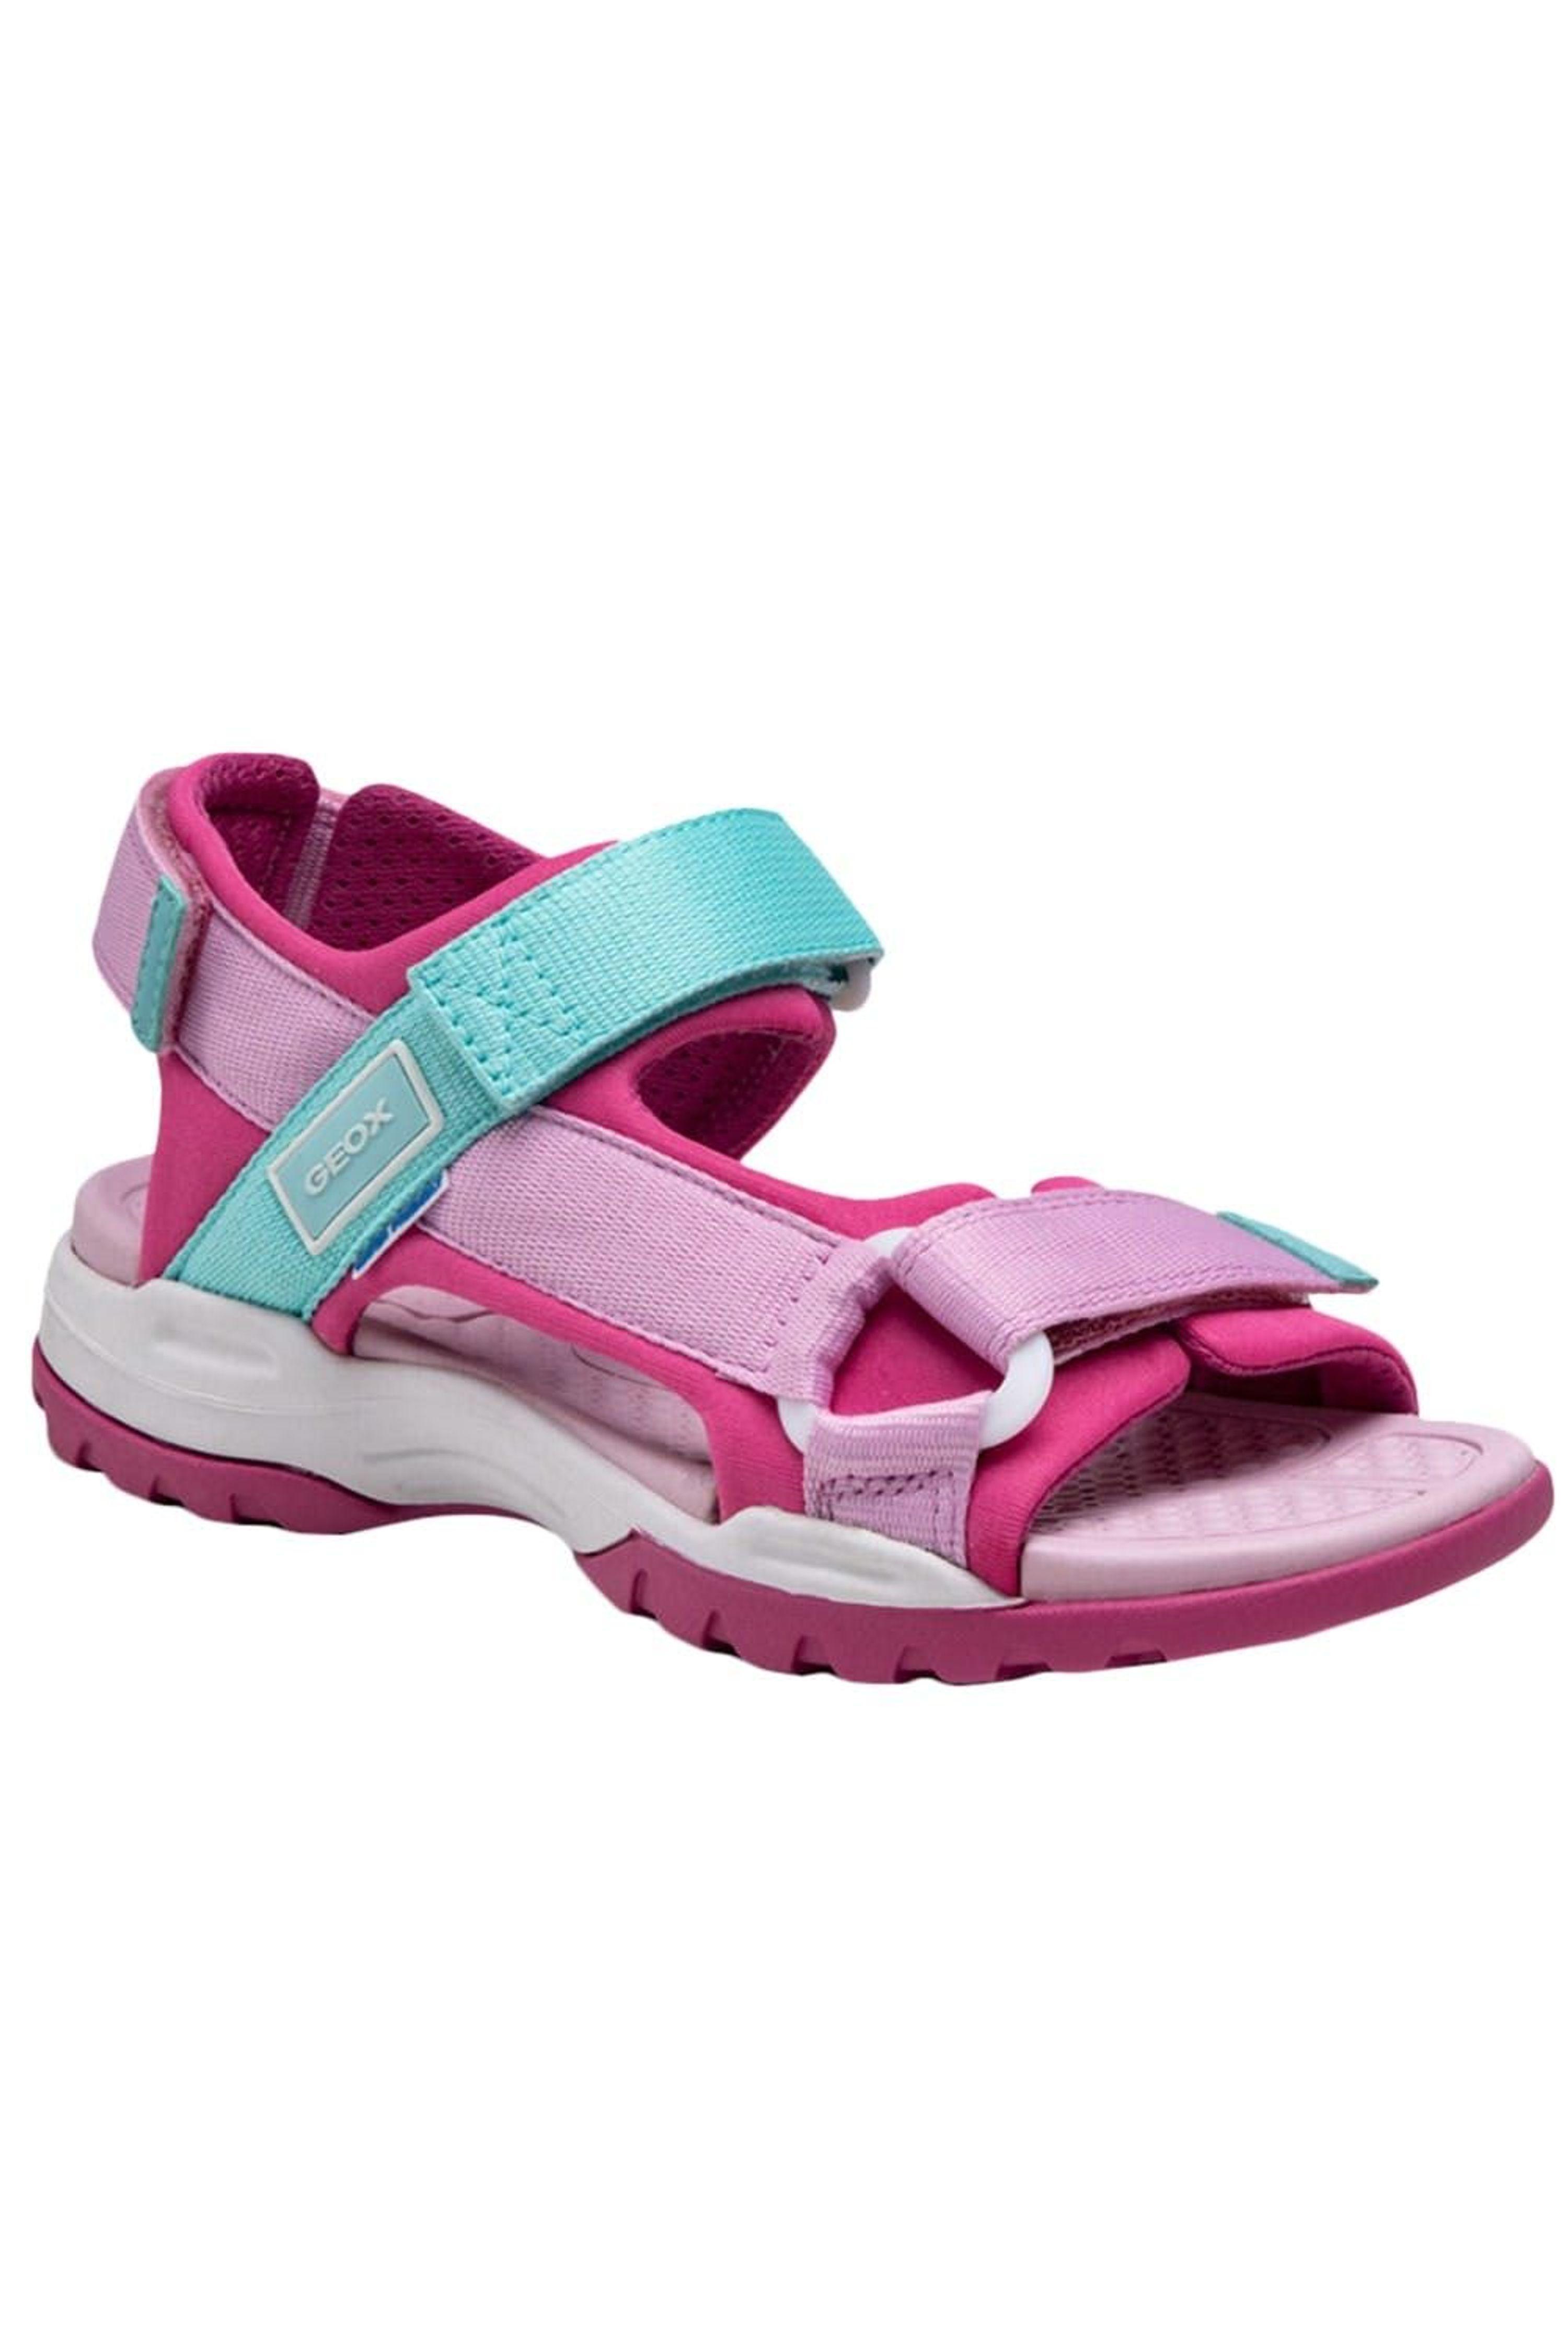 Geox Girls Borealis Sandals in Pink | Lyst